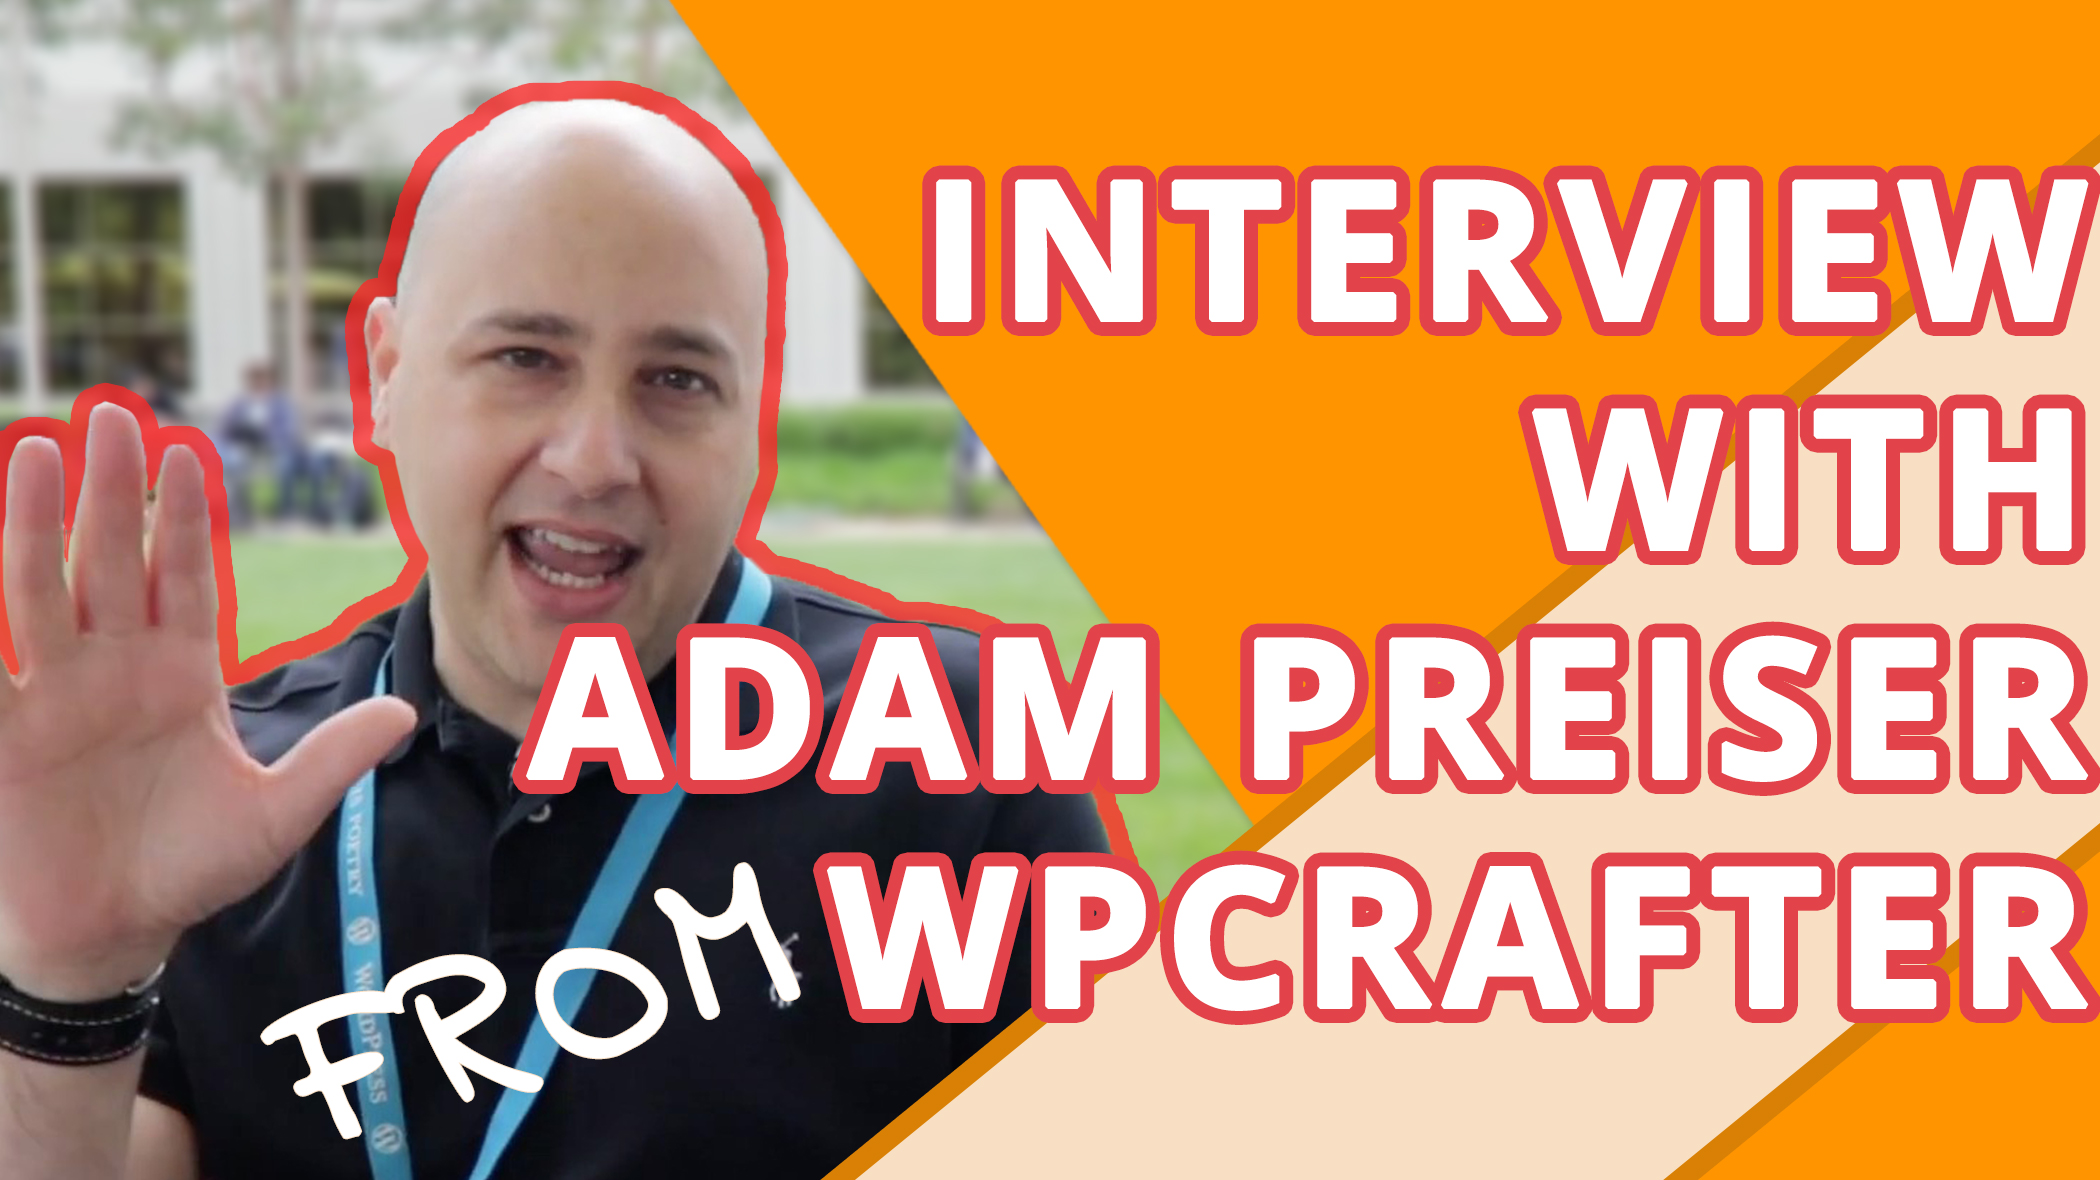 Interview with Adam Preiser from WPCrafter, CartFlows, and More. WordCamp Orange County 2019